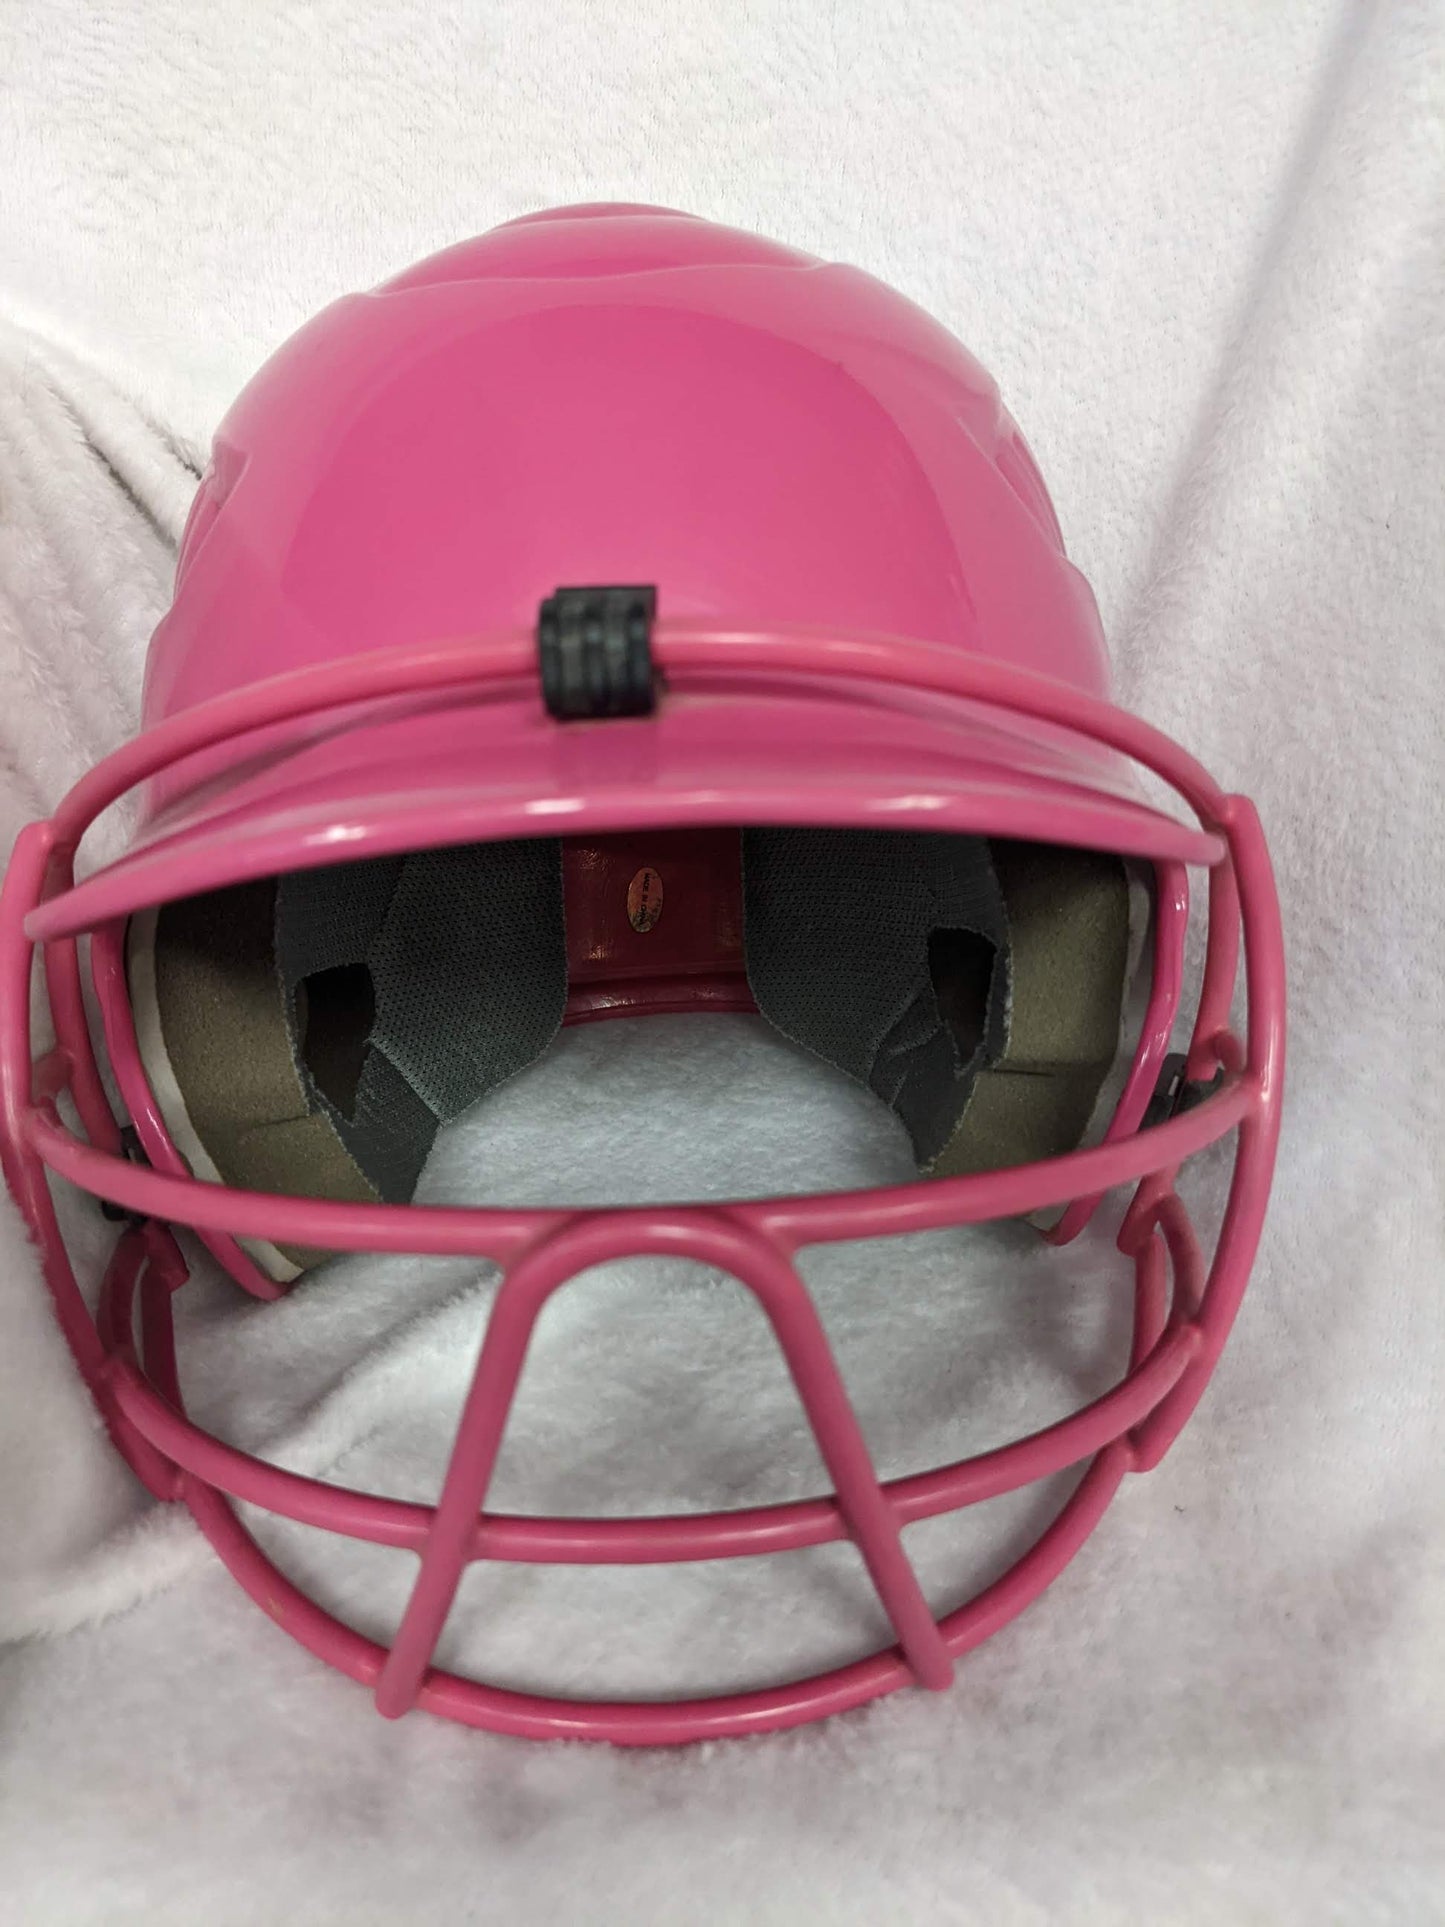 Rawlings Baseball/Softball Batting Helmet Size 6.5 In - 7.5 In Color Pink Condition Used